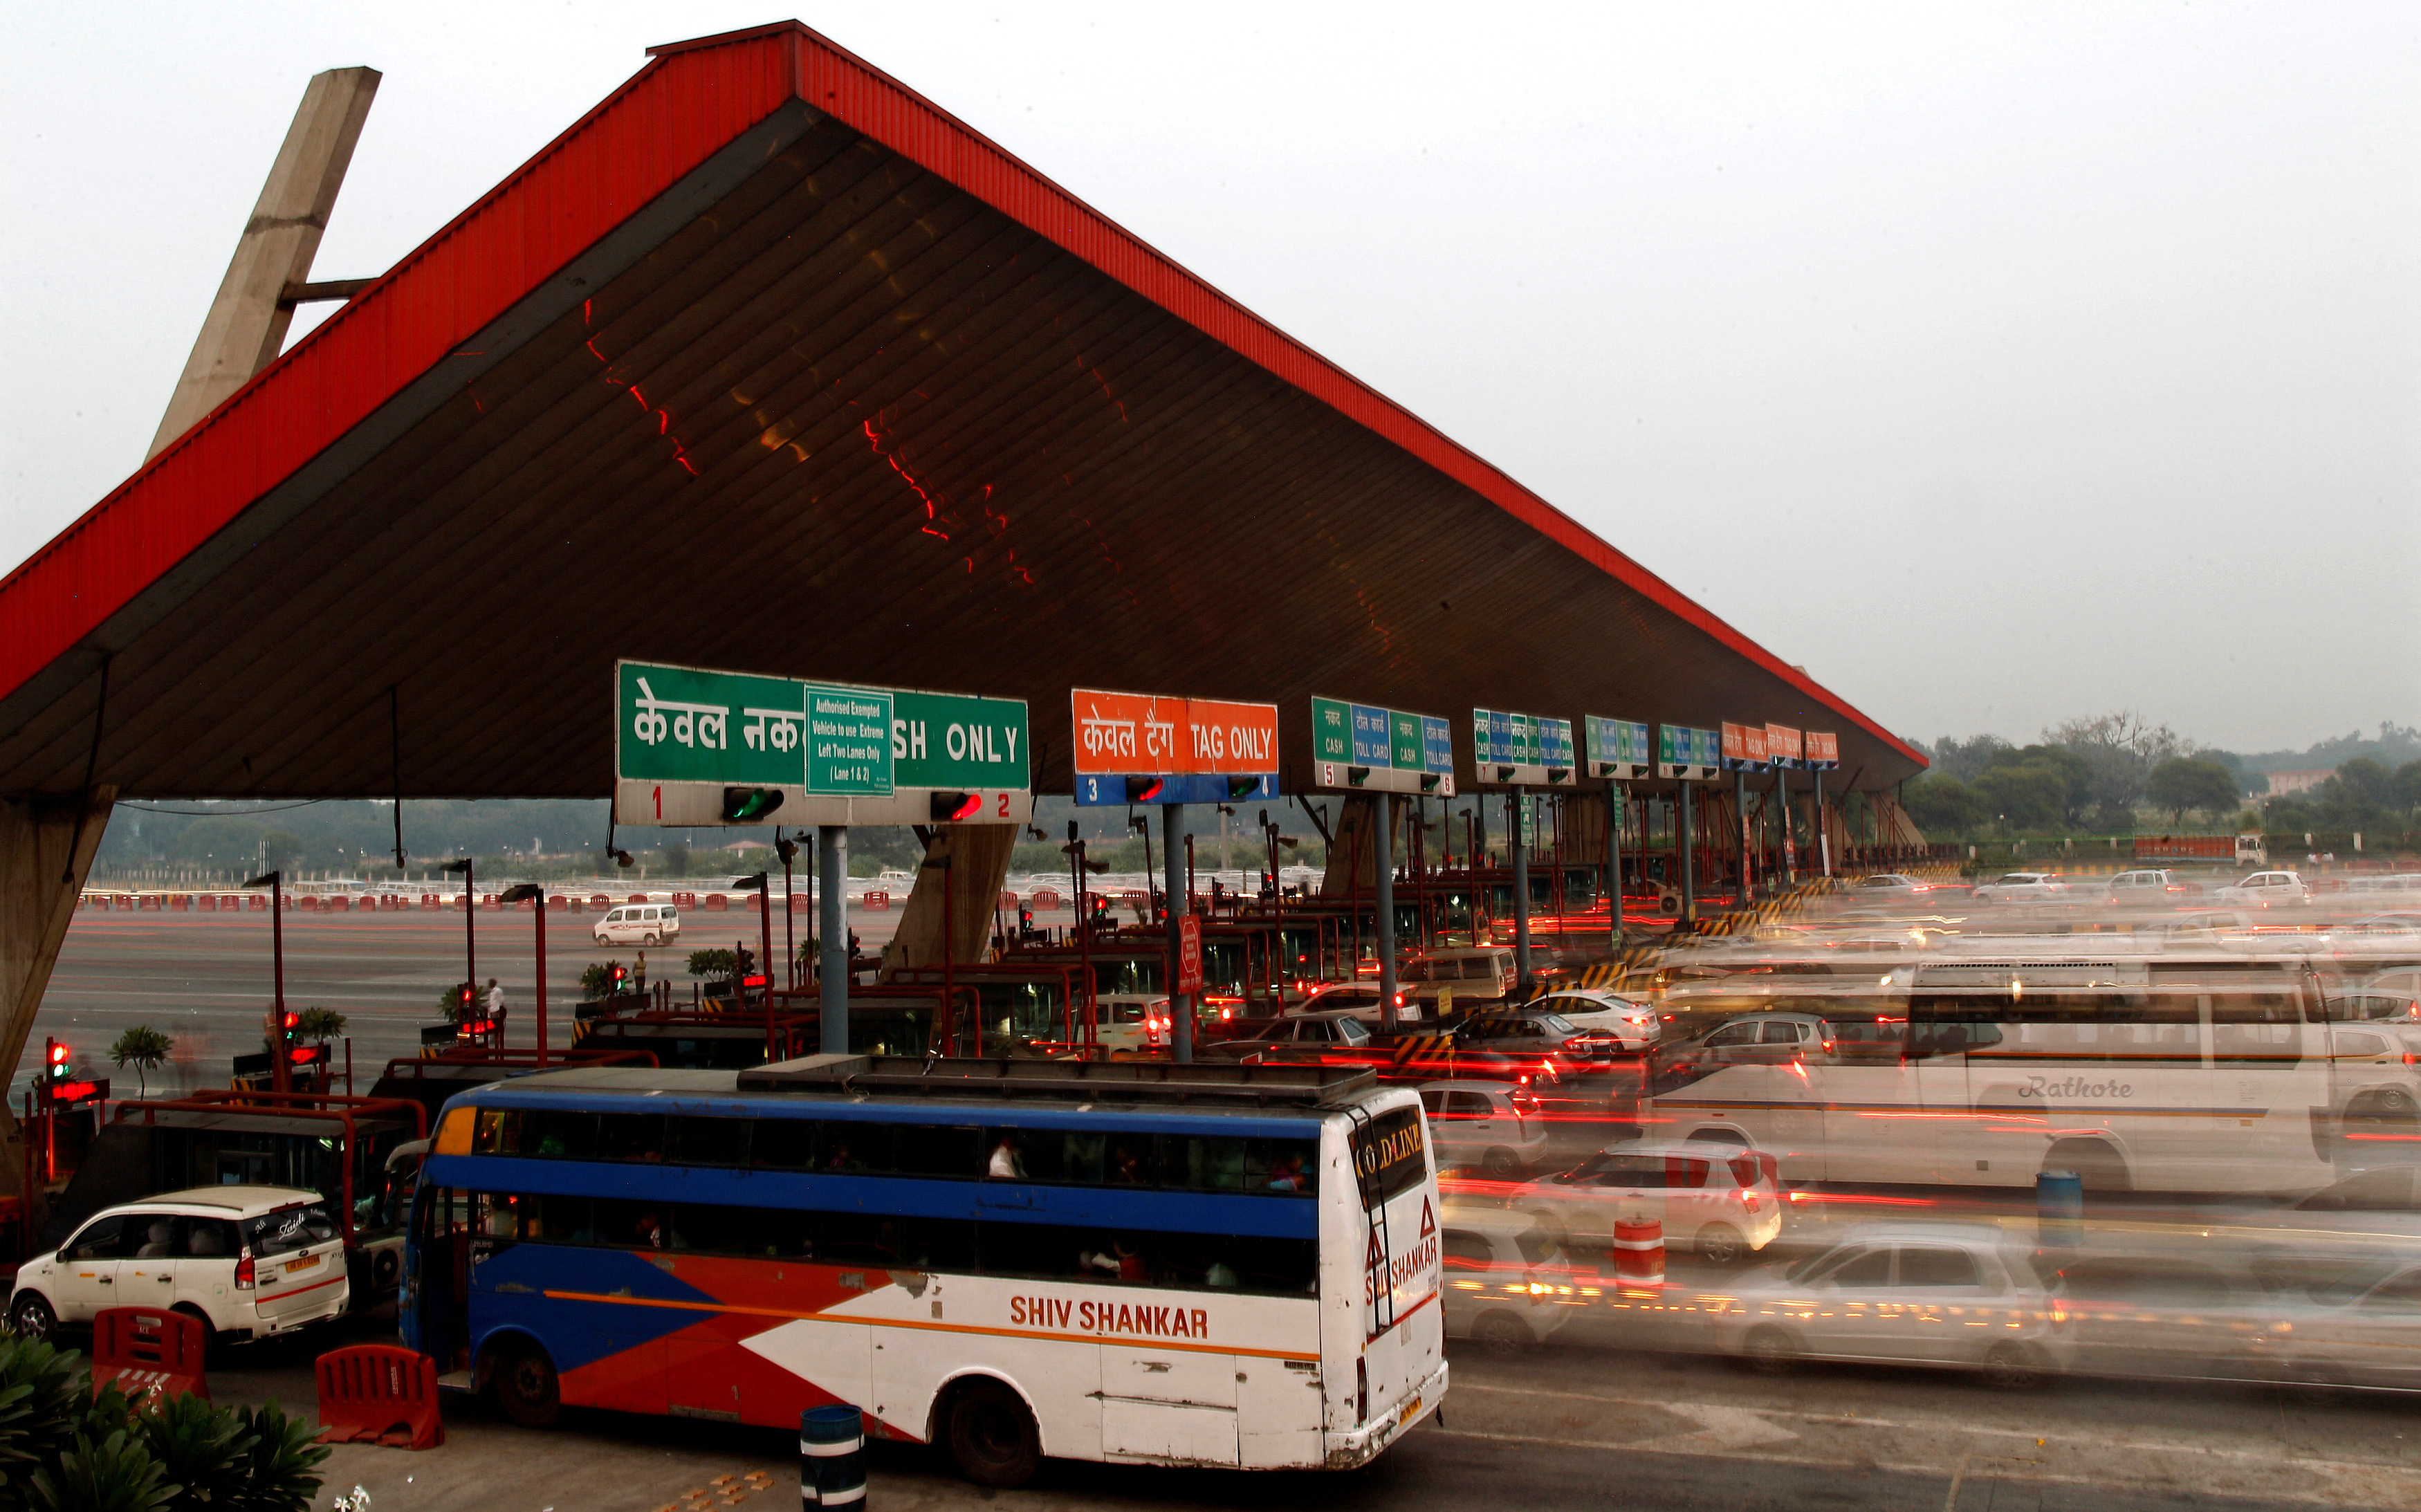 Vehicles pass through a toll plaza in Gurgaon on the outskirts of New Delhi, India